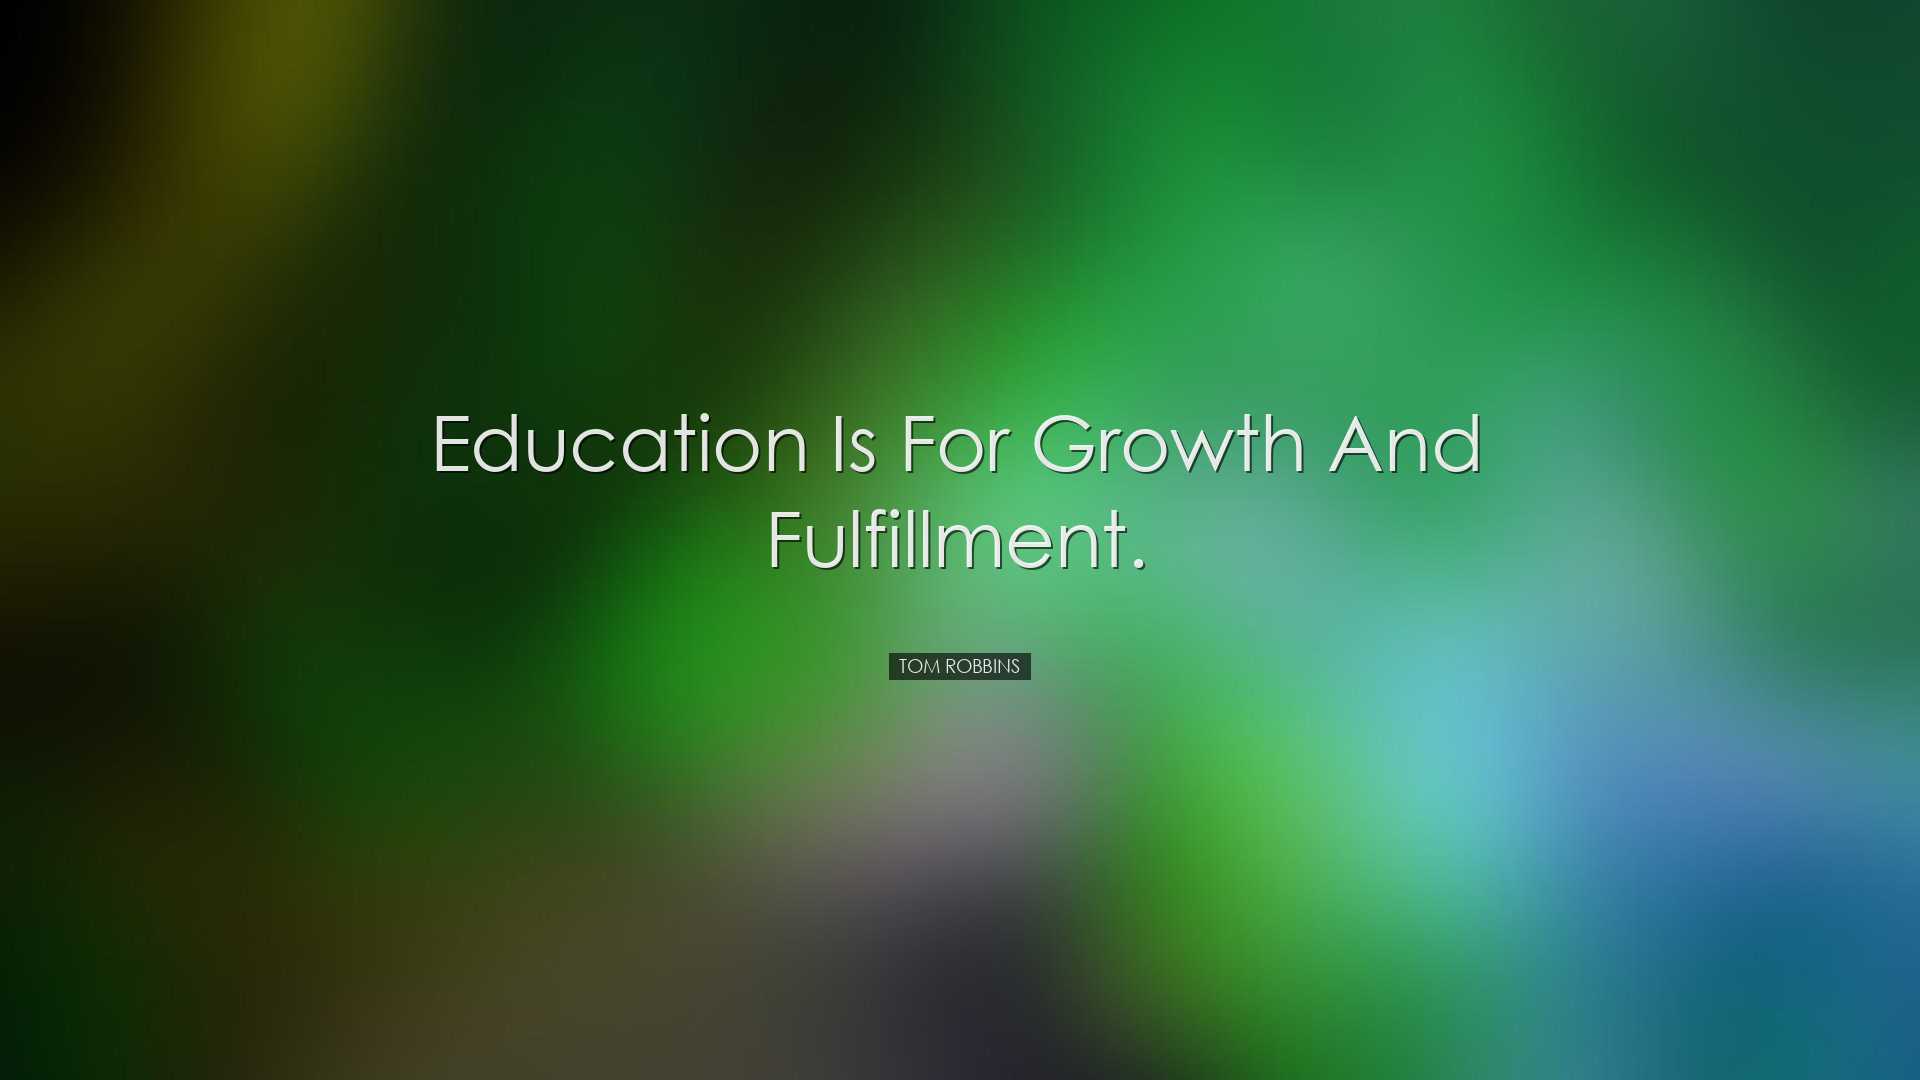 Education is for growth and fulfillment. - Tom Robbins